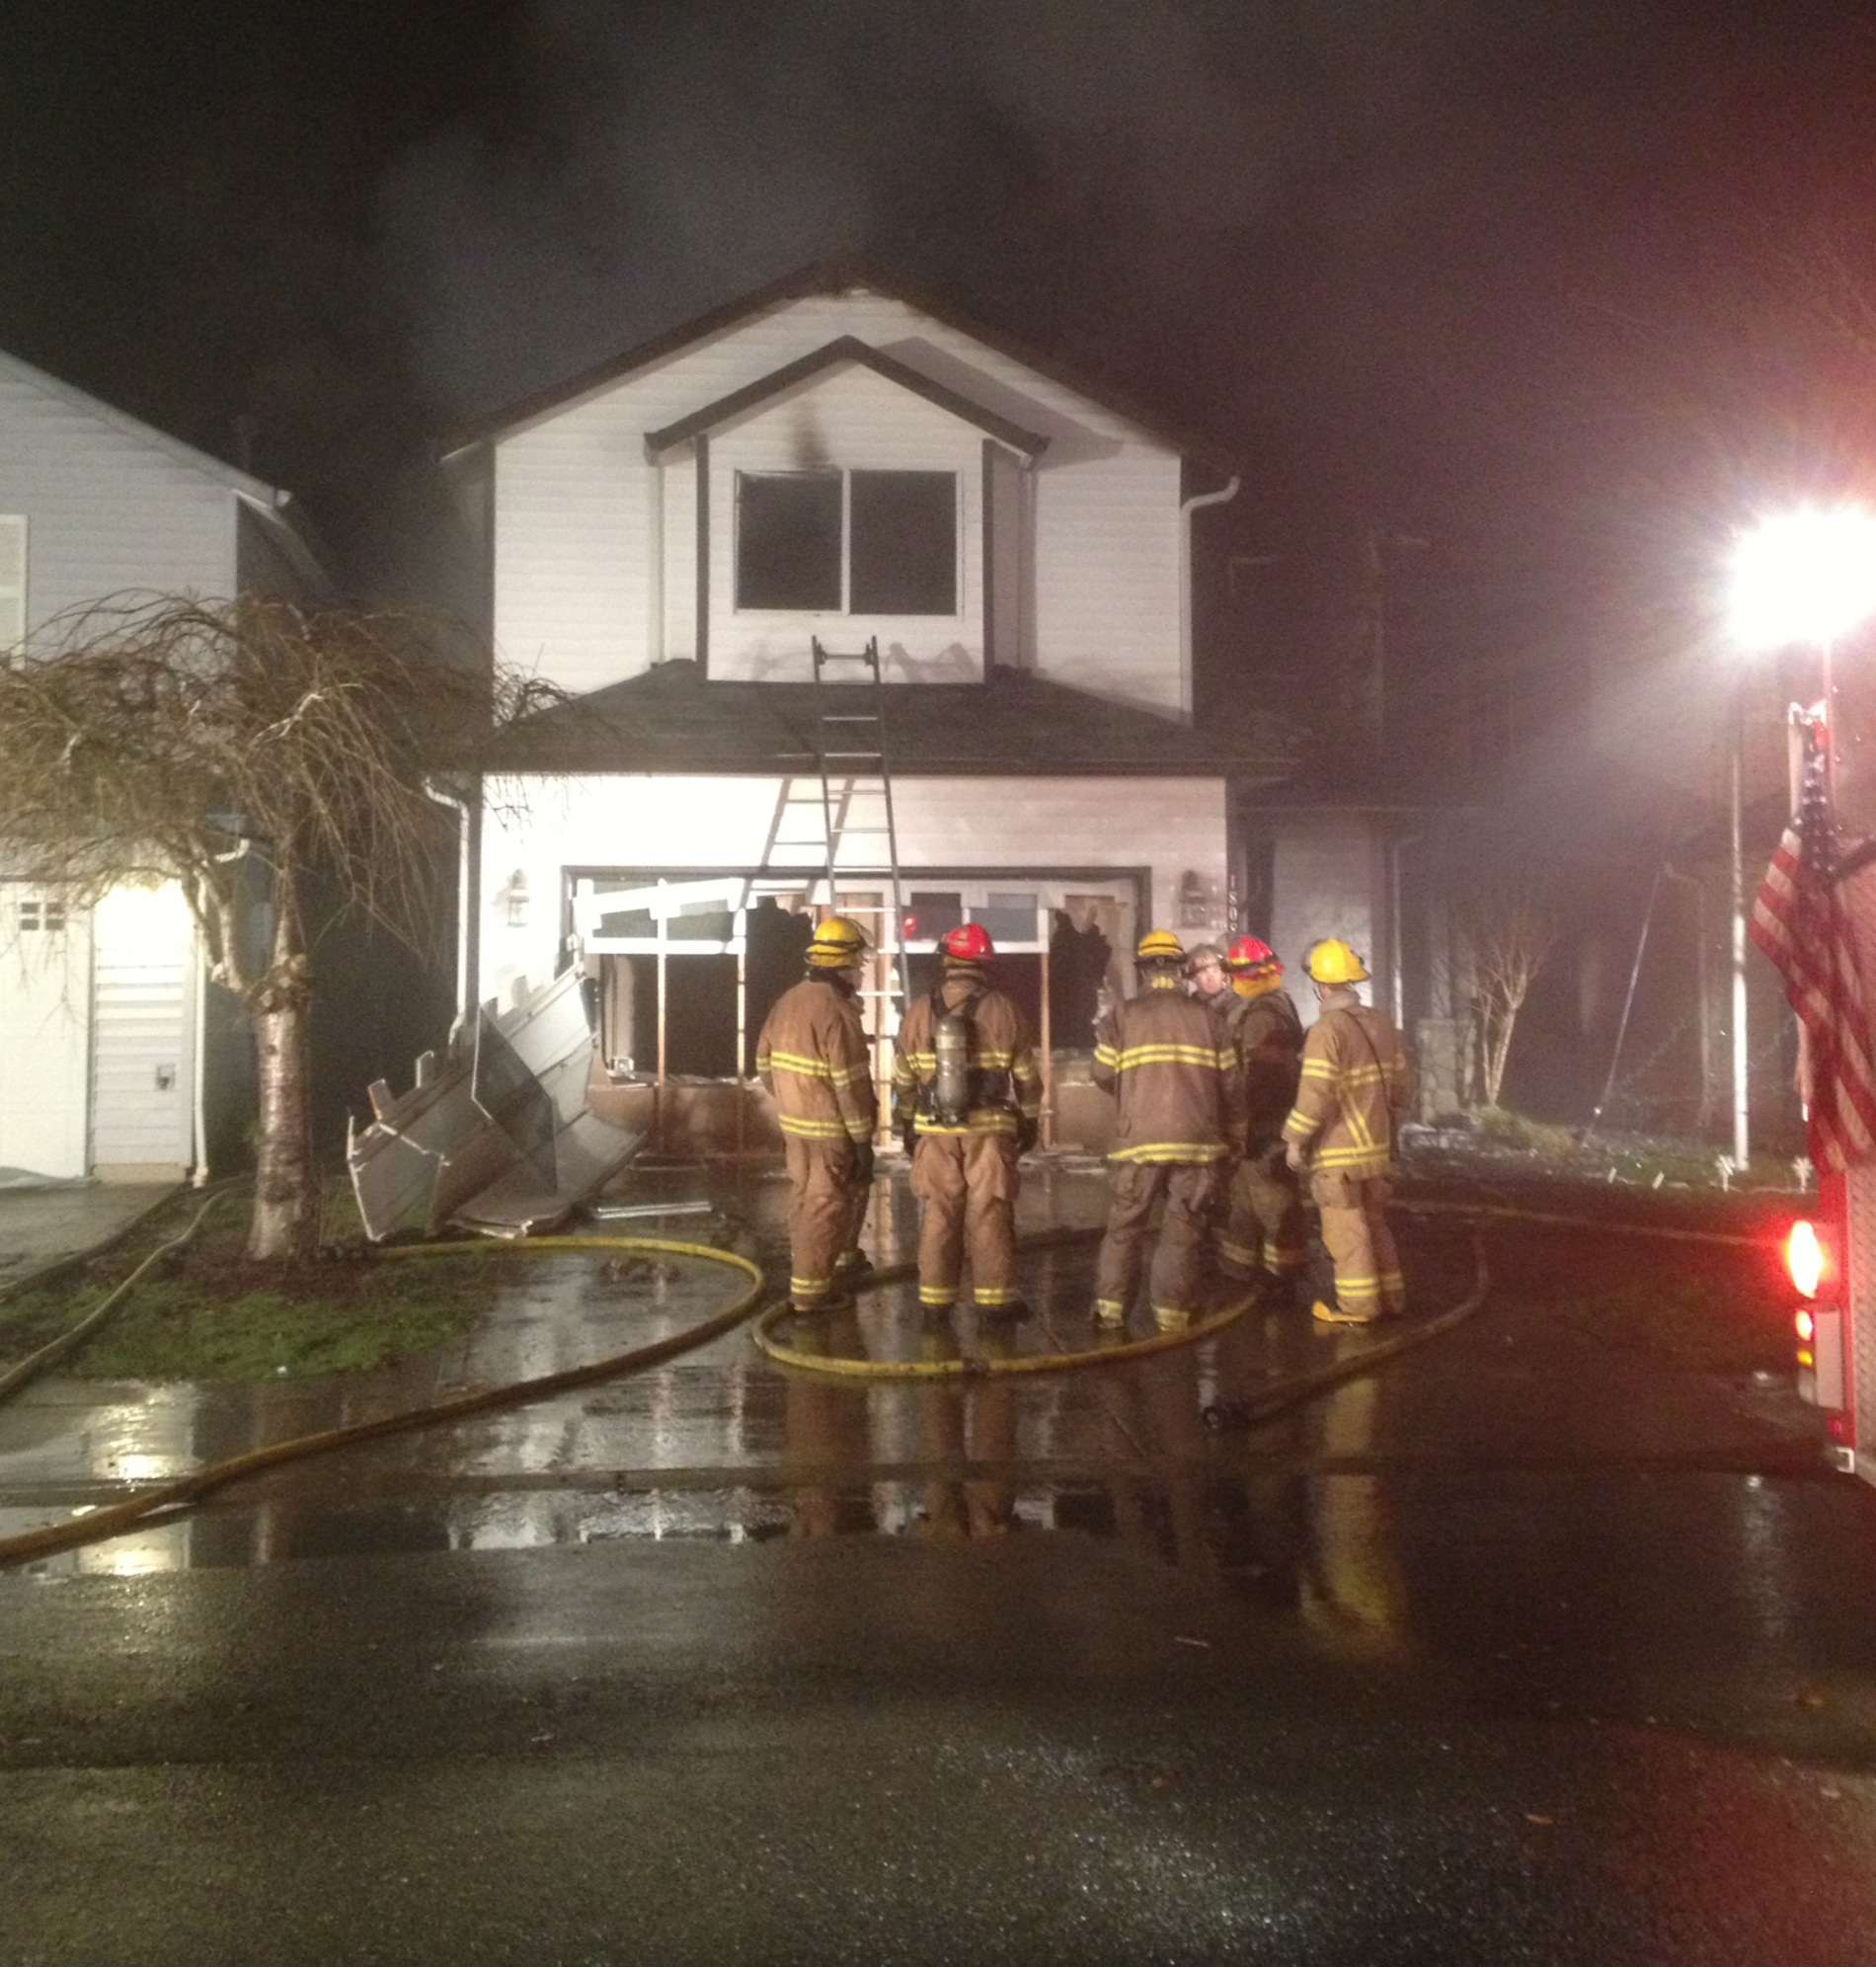 Crews responded to a house fire at 1808 S.W. Sixth St. in Battle Ground early Tuesday morning.